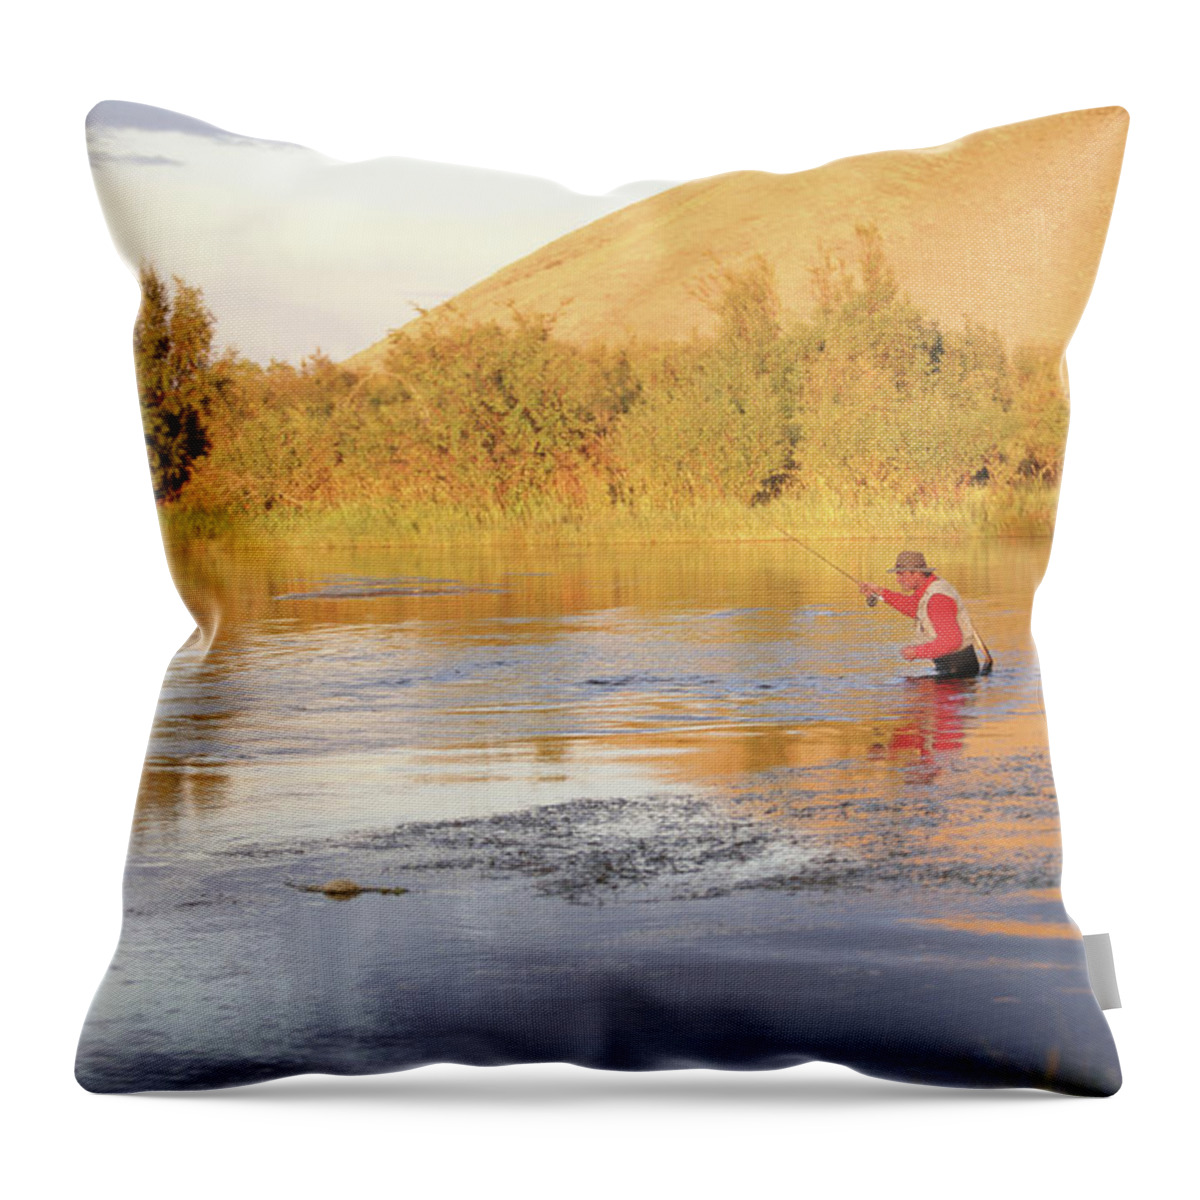 One Man Only Throw Pillow featuring the photograph Usa, Idaho, Sun Valley, Silver Creek by Steve Smith